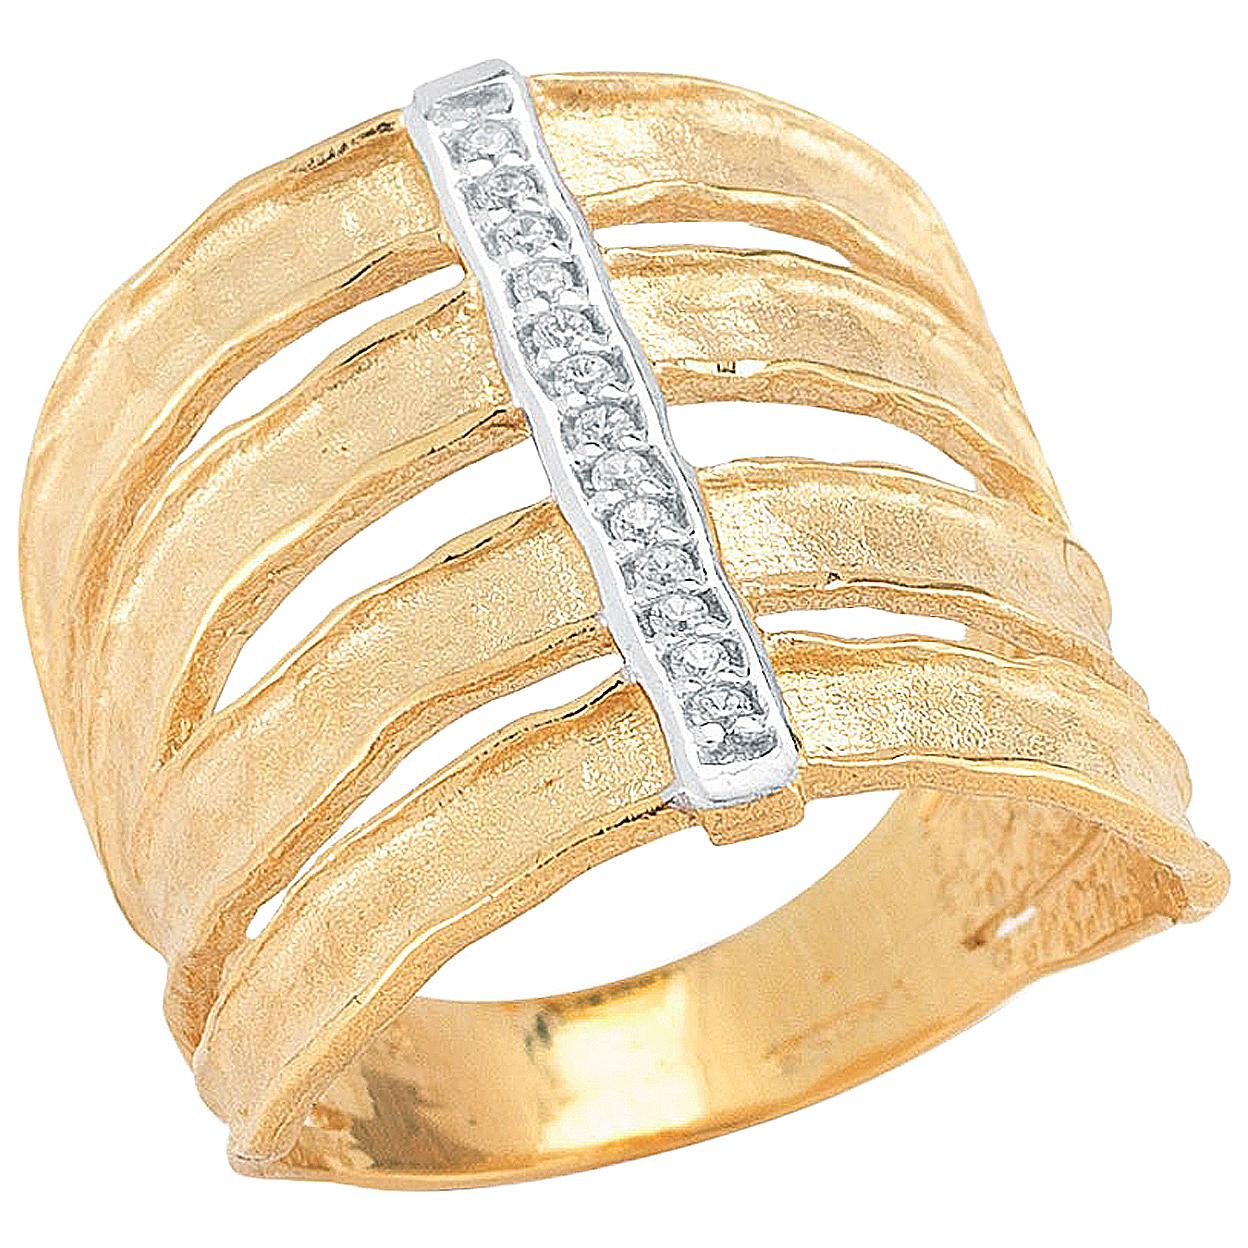 Handcrafted 14 Karat Yellow Gold Hammered Cut-Out Cigar Ring